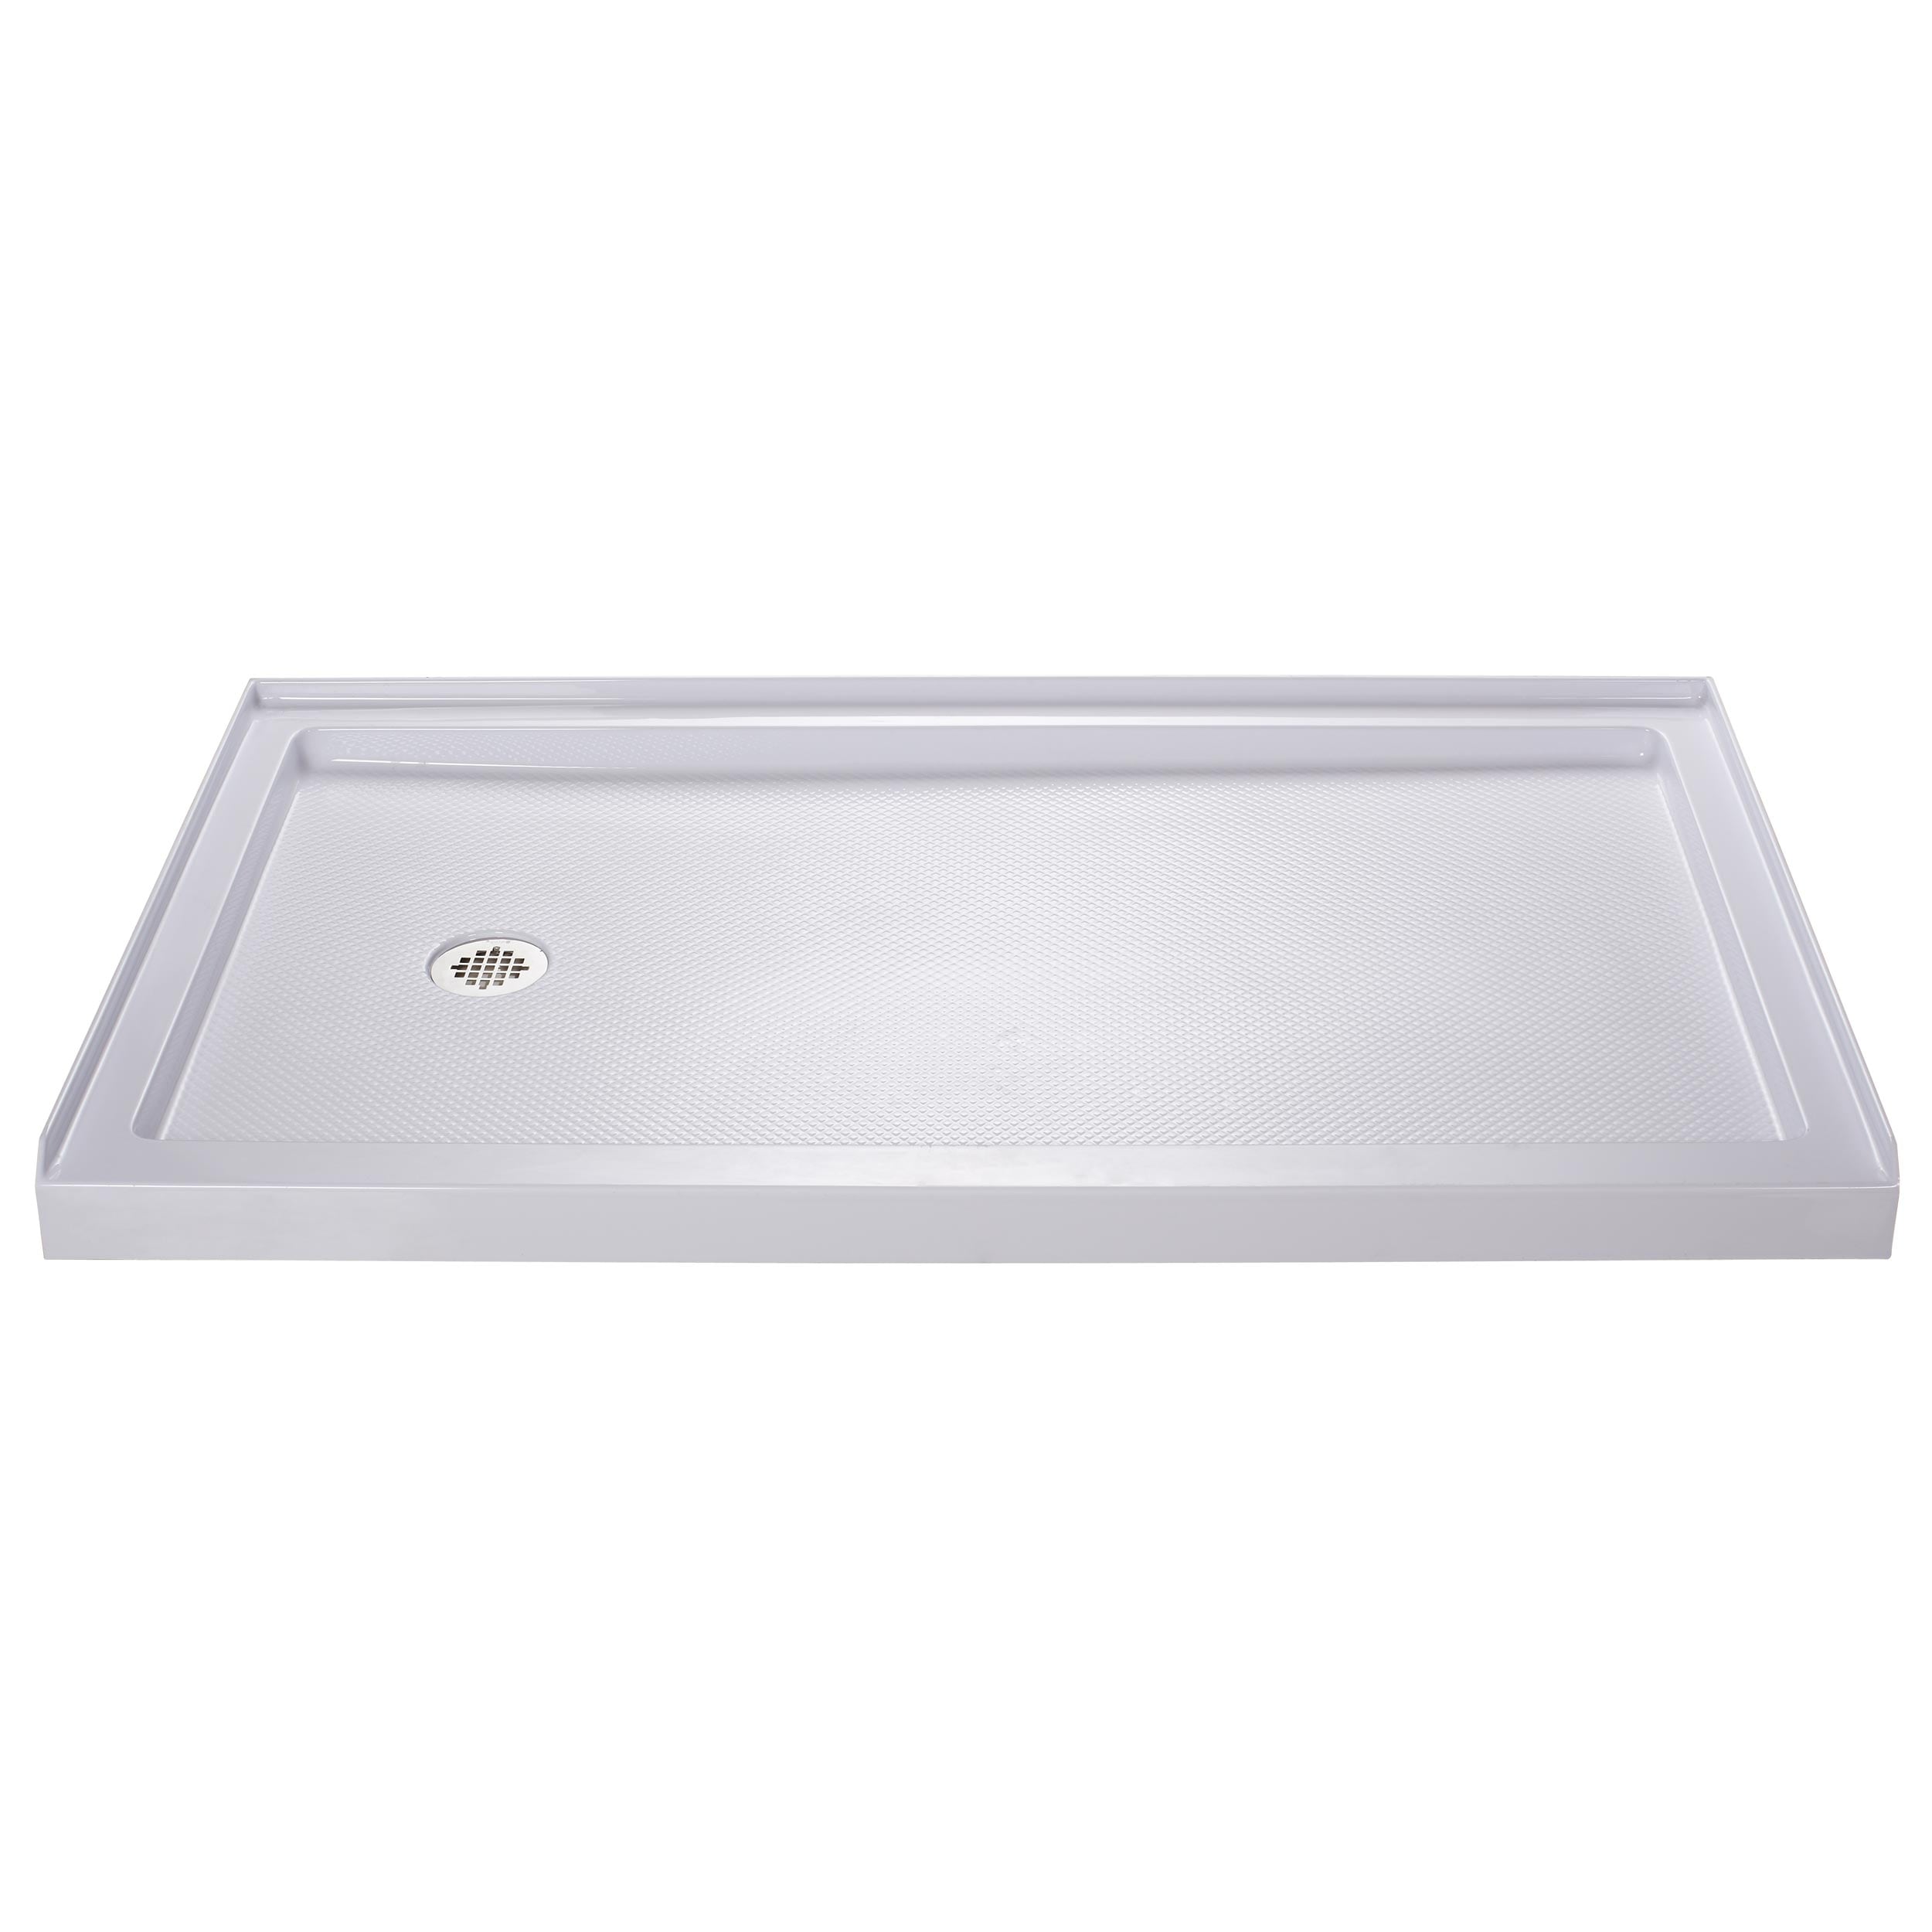 Dreamline 60x32 Slimline Single Threshold Shower Base (WhiteMaterials Acrylic/ ABSNumber of pieces One (1) Dimensions 2.75 inches high x 60 inches wide x 32 inches deepDrain configuration Center, left hand or right hand  High quality scratch and stain